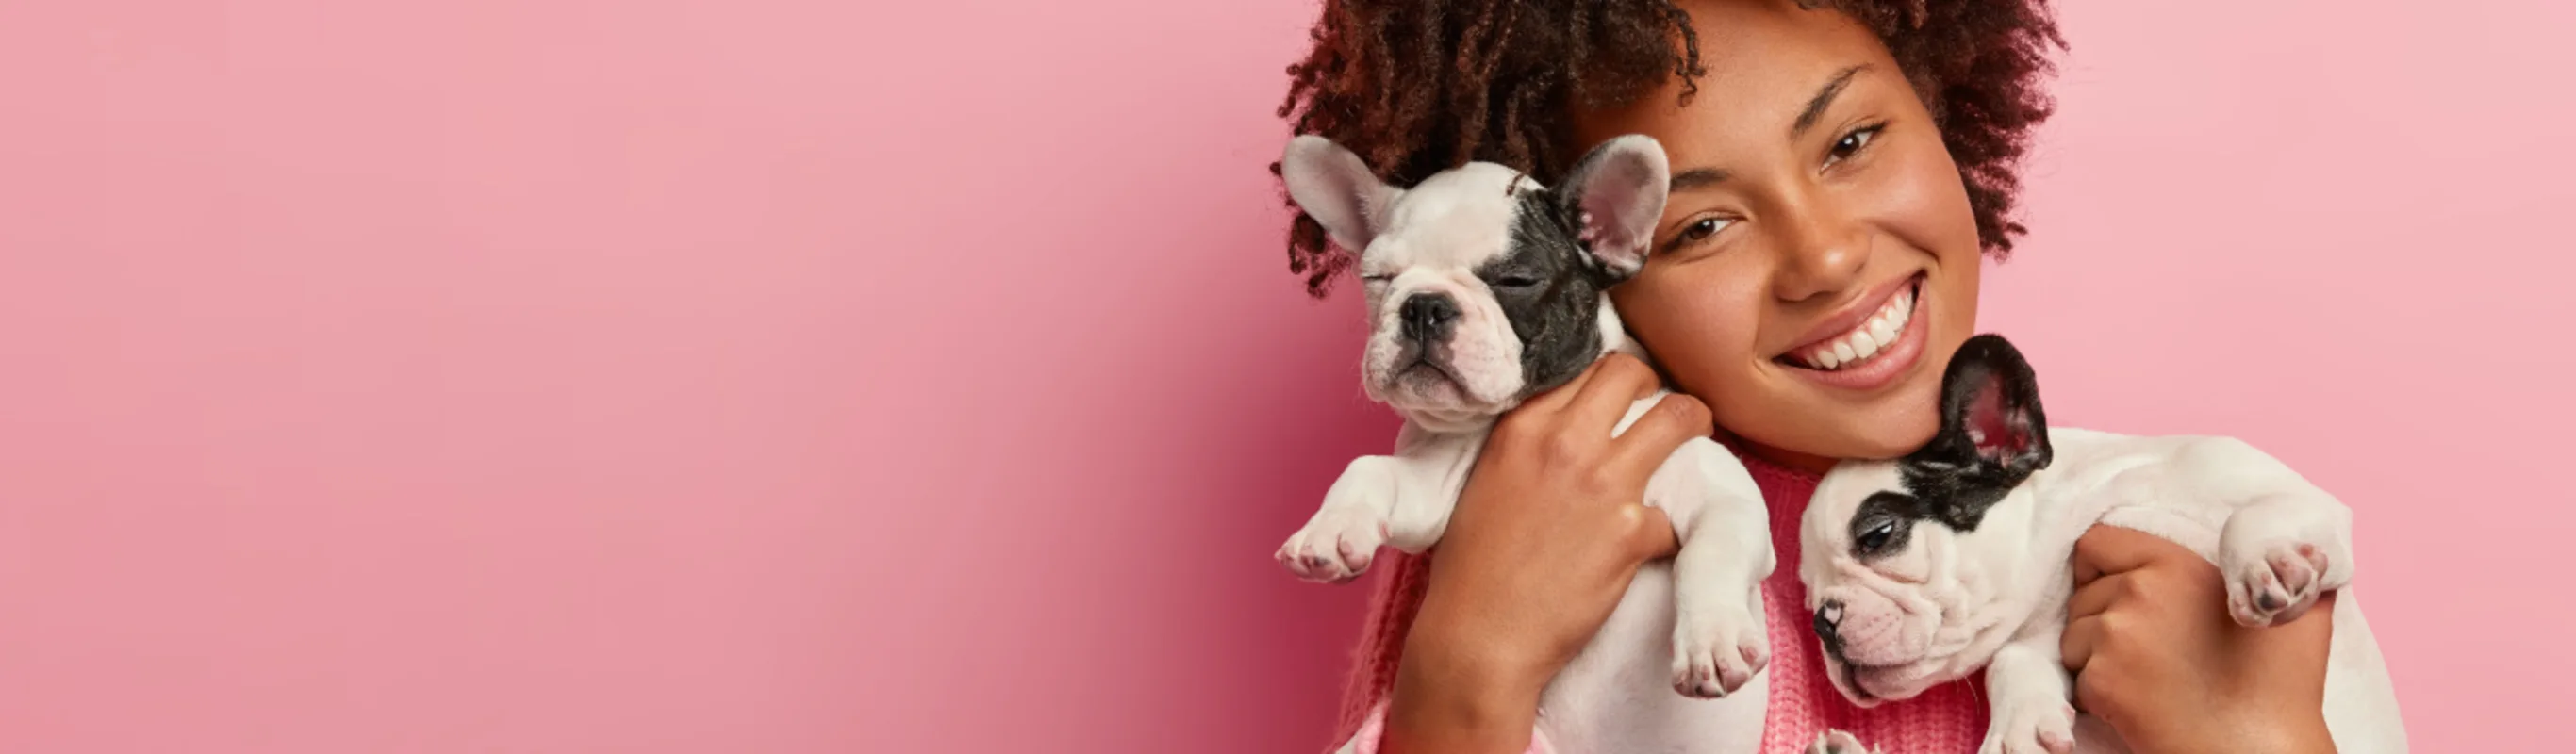 Woman Holding Two Puppies - Pink Background